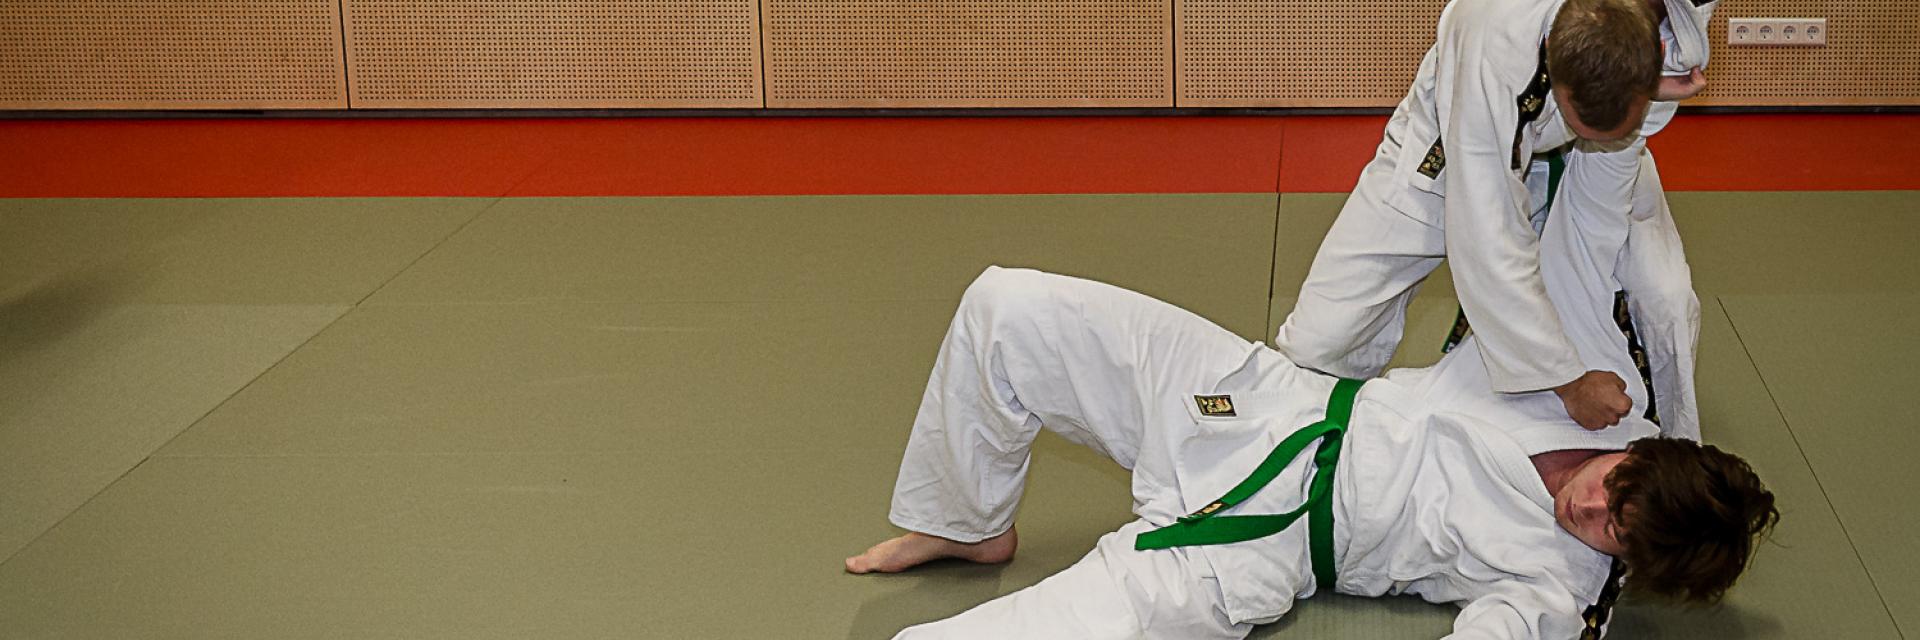 Jiujitsu: one of the many sports to choose from at the Sports Center